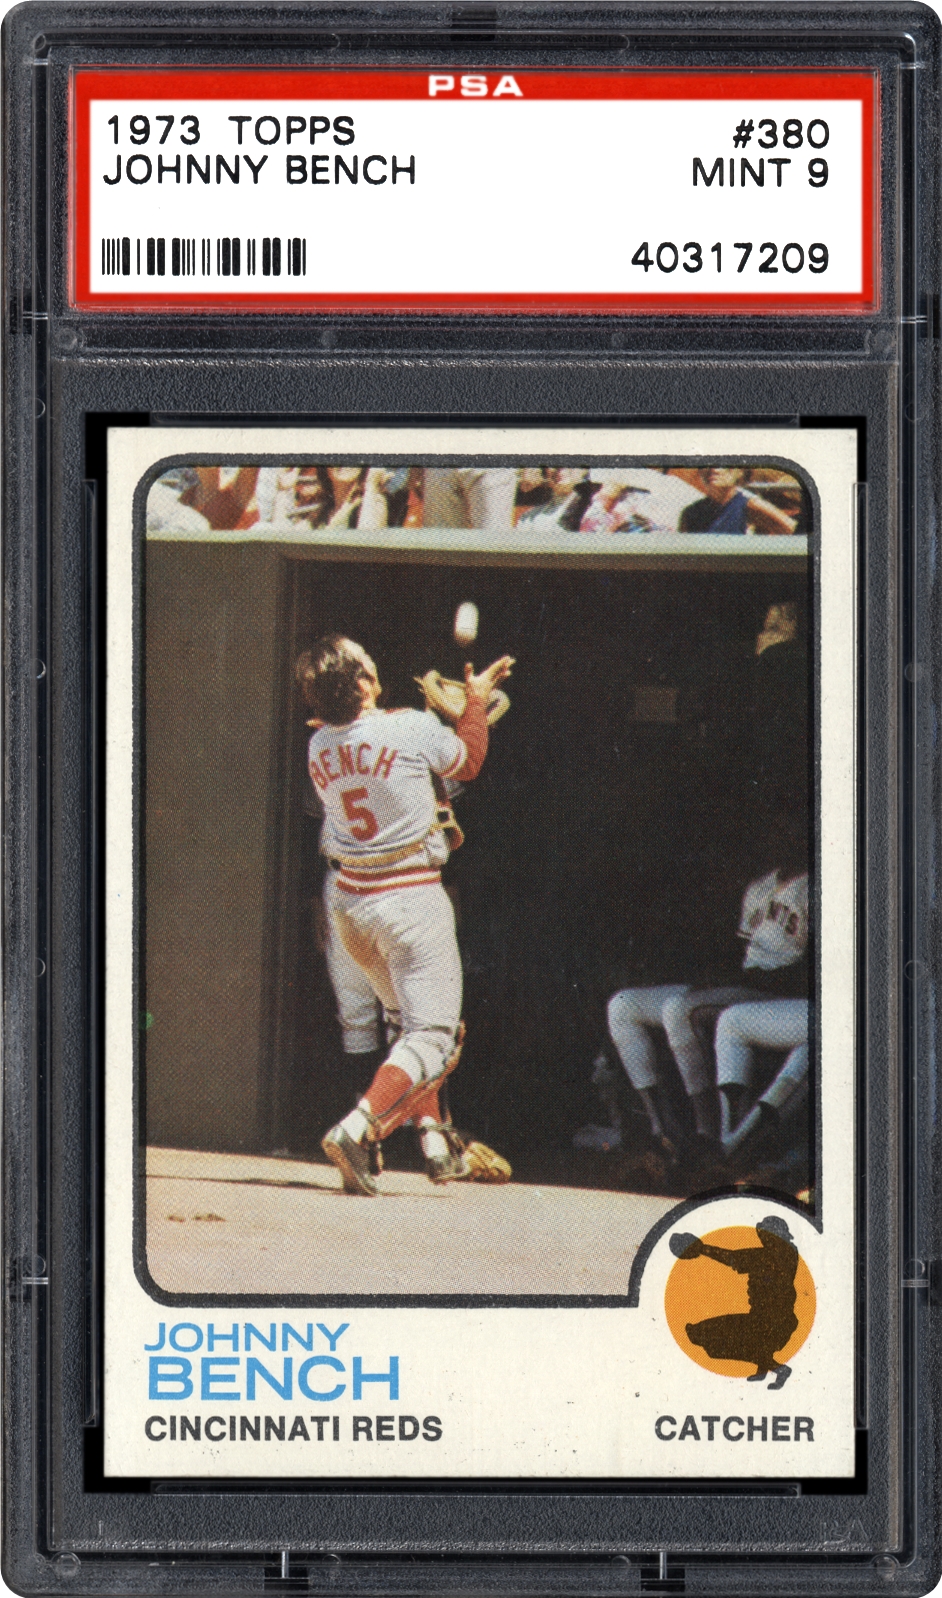 1973 Topps Johnny Bench | PSA CardFacts™